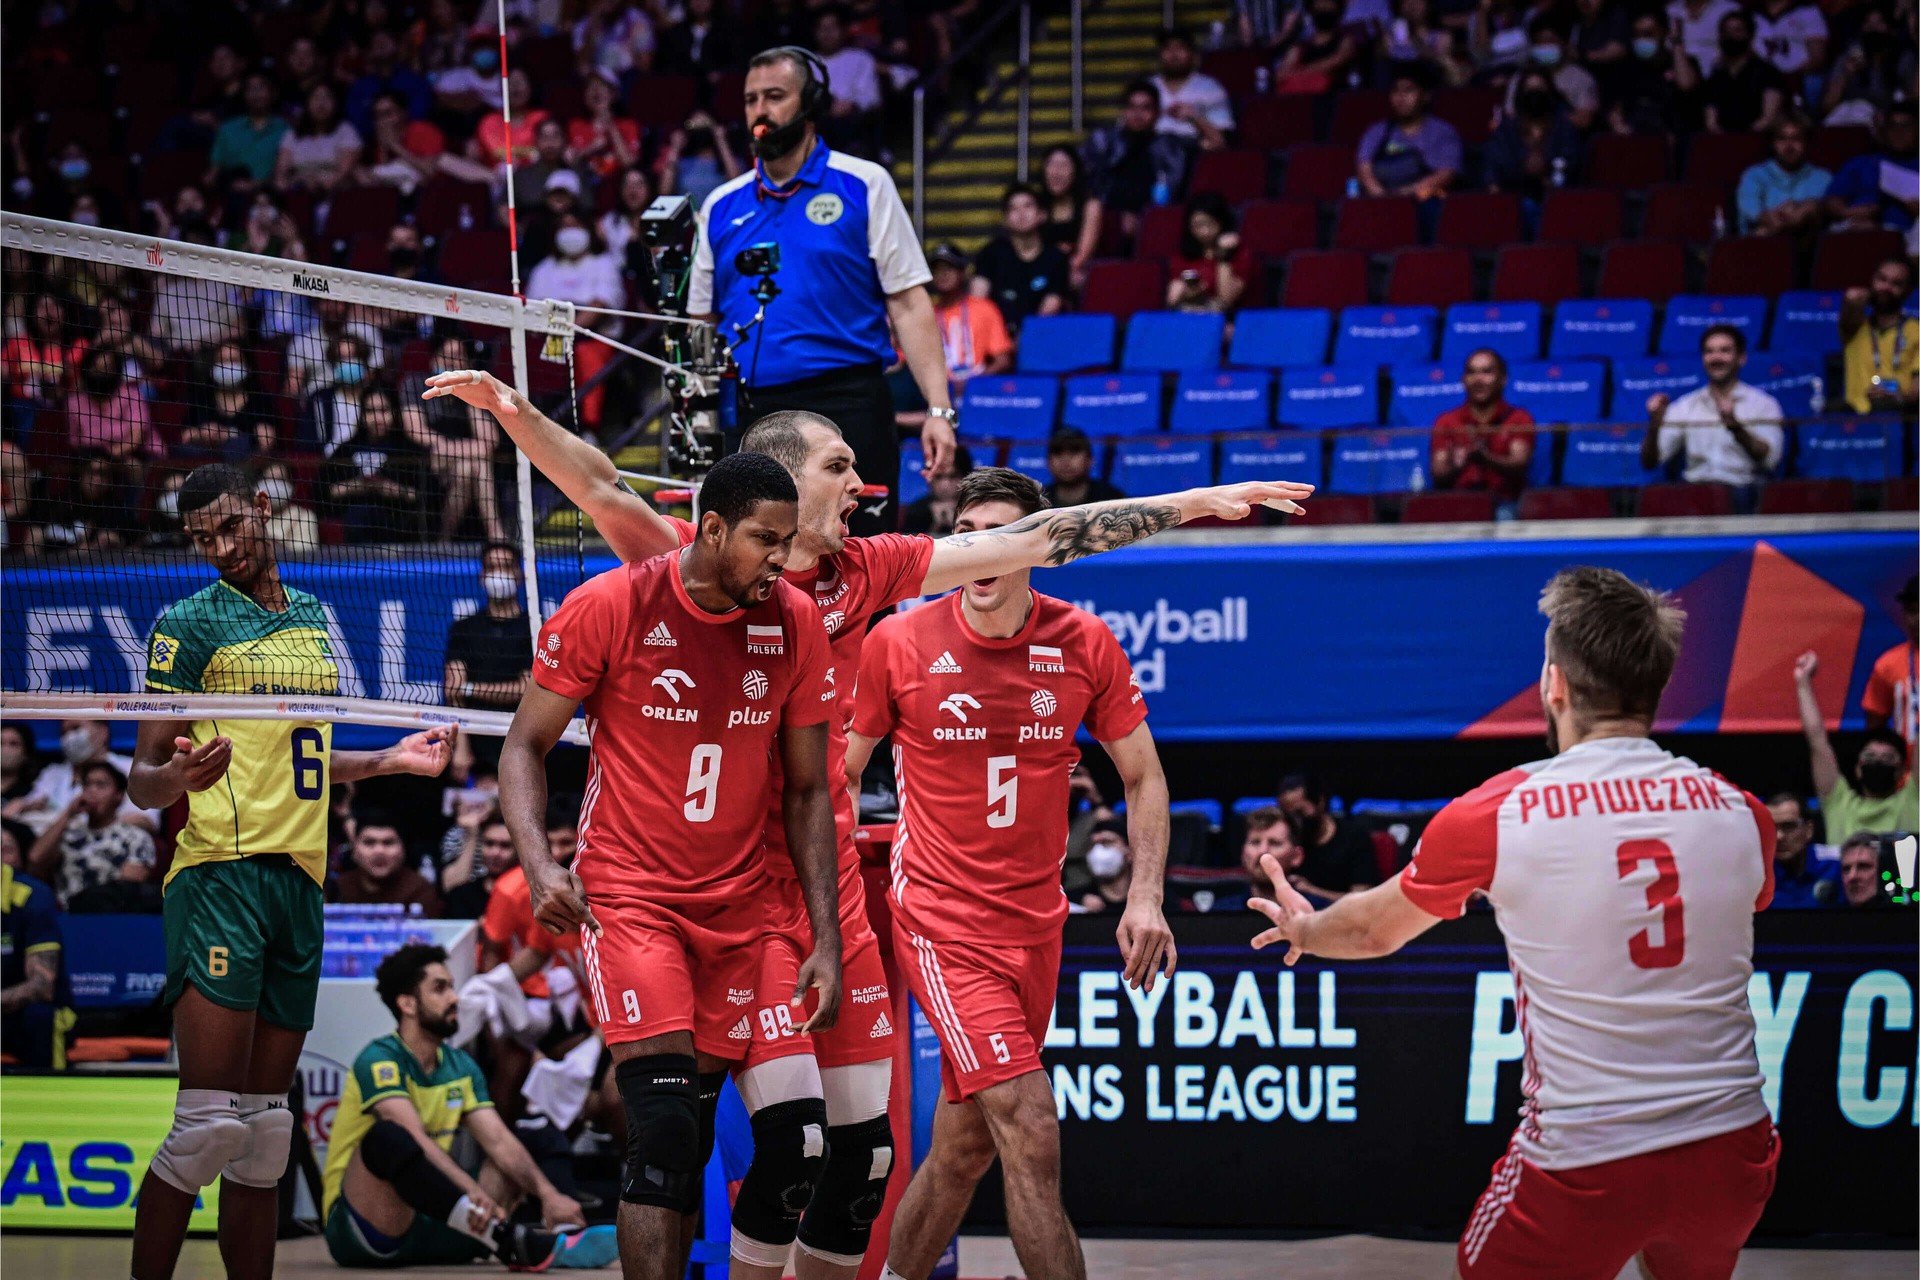 Polish volleyball players fight for another victory in the Nations League